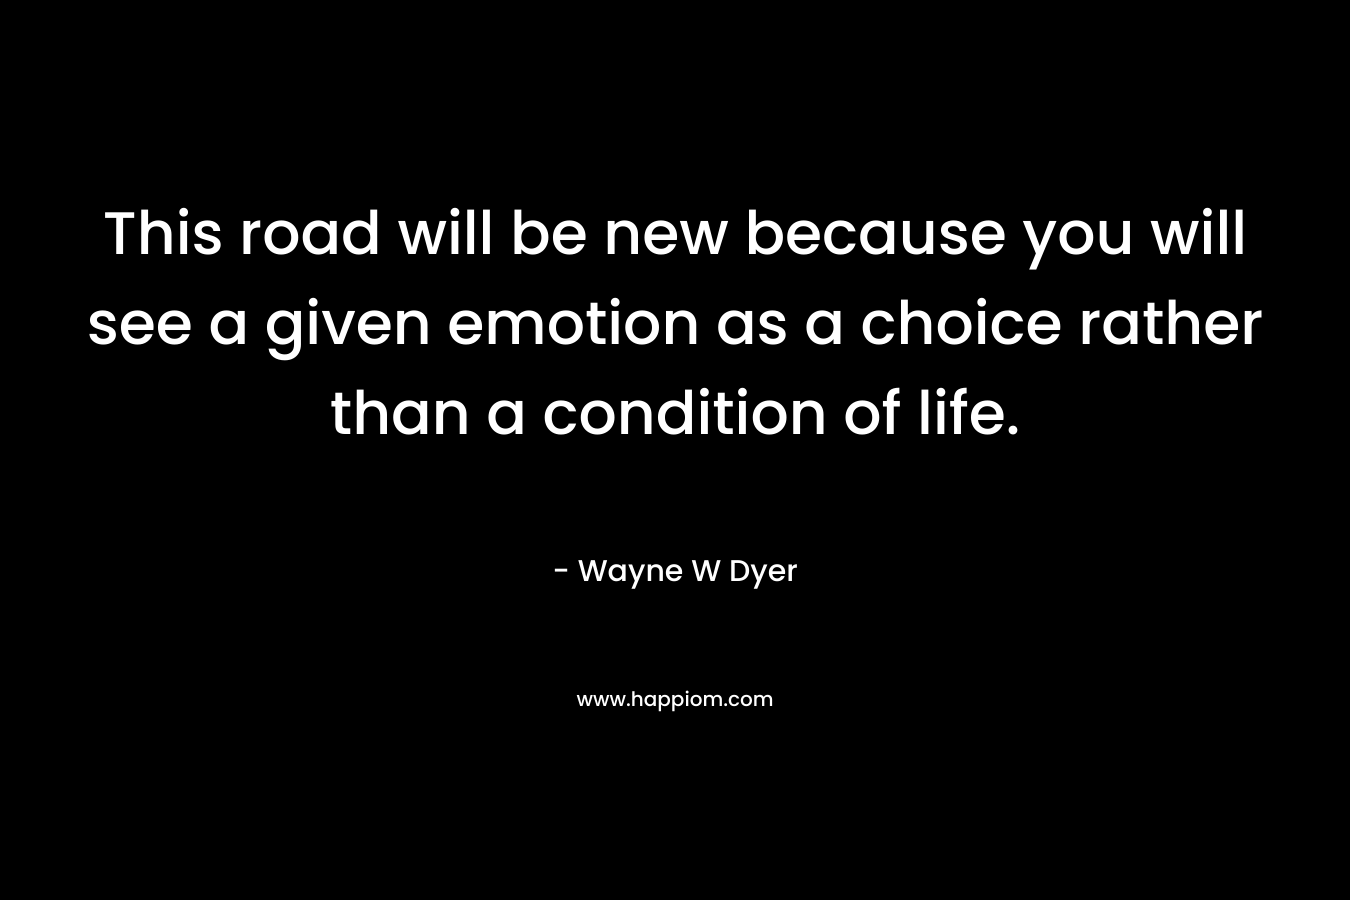 This road will be new because you will see a given emotion as a choice rather than a condition of life.